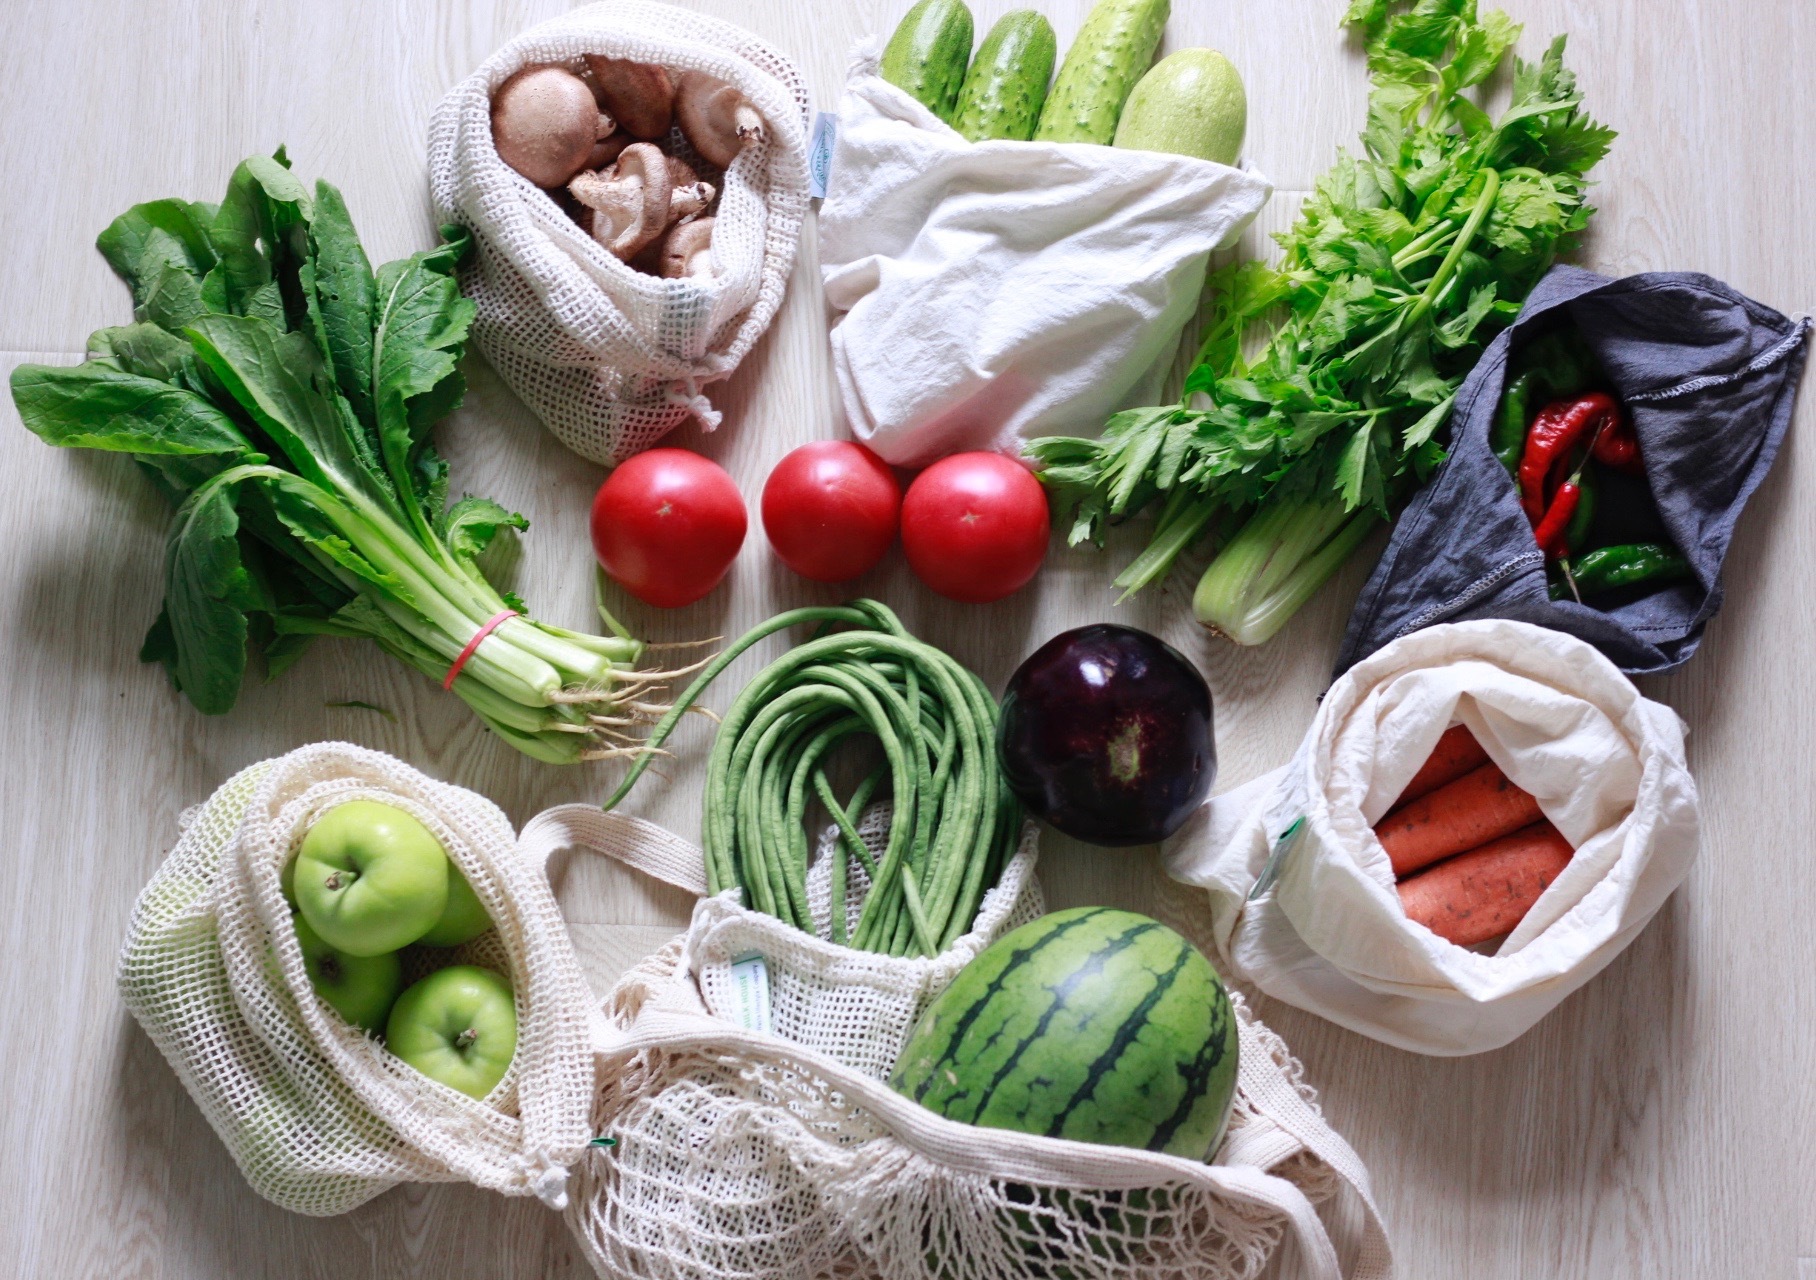 Zero-waste grocery shopping (Image: Carrie Yu)